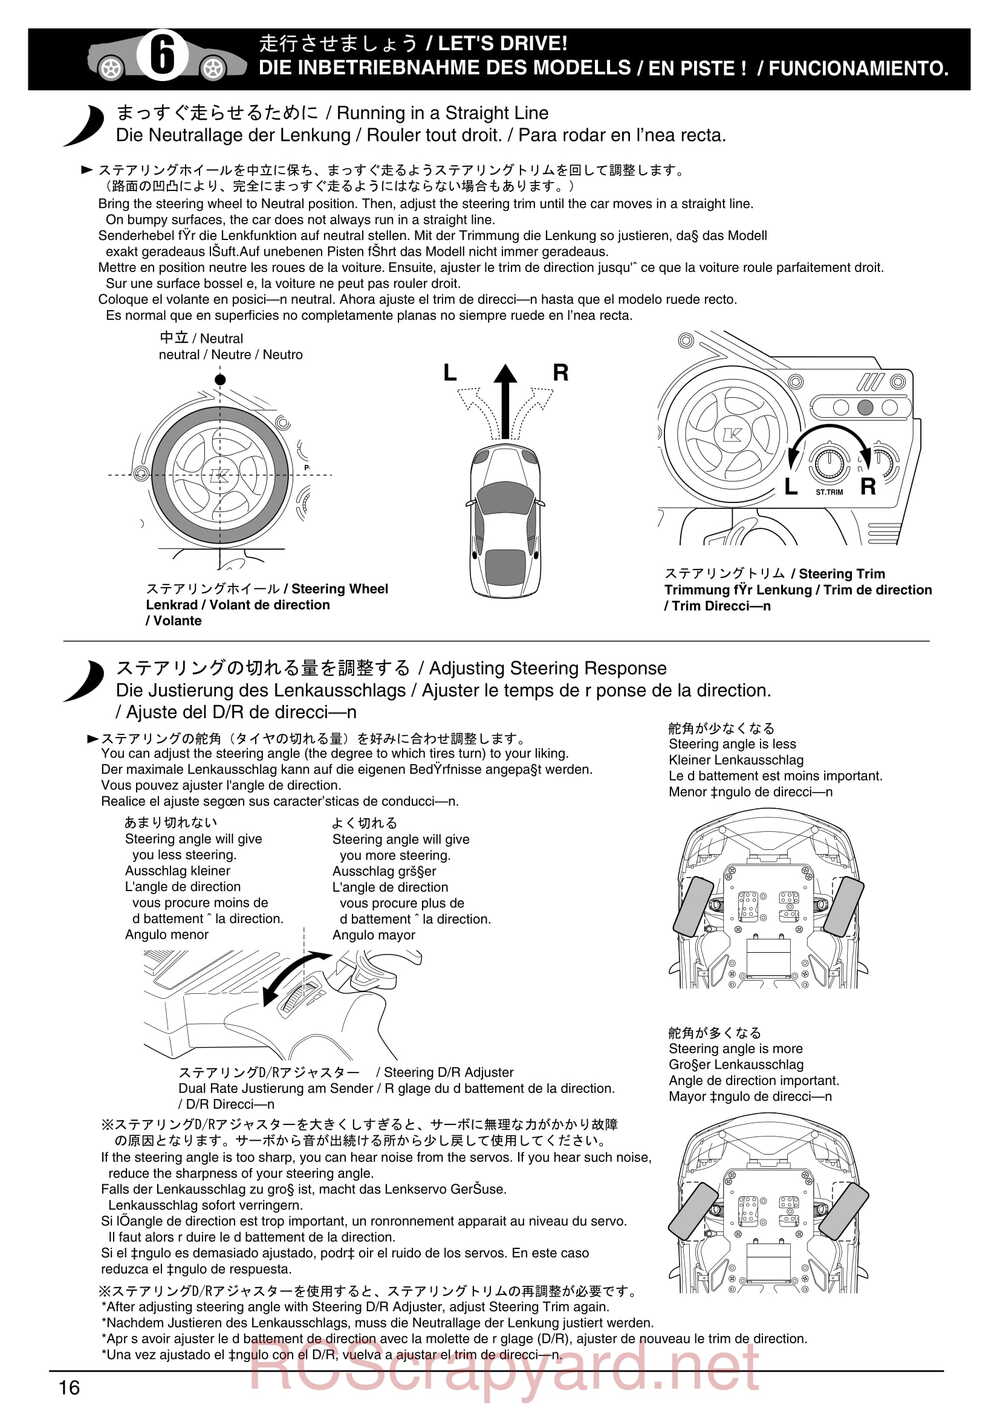 Kyosho - 30551 - a12 Sport - Manual - Page 16